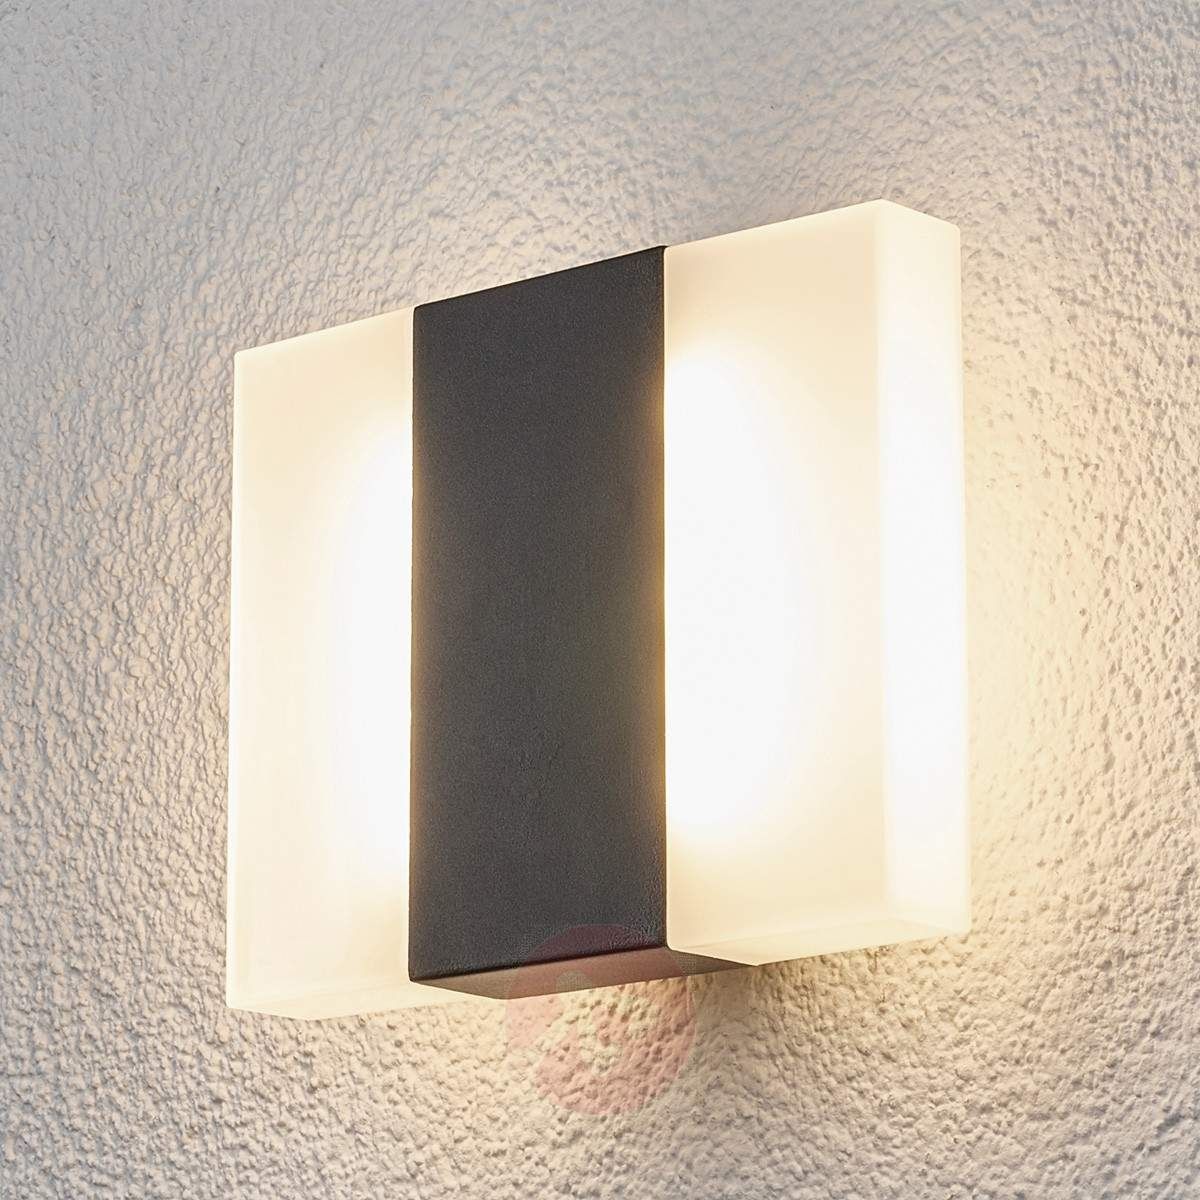 Börje – Led Outdoor Wall Light In A Square Shape | Lights.co.uk With Led Outdoor Wall Lighting (Photo 5 of 15)